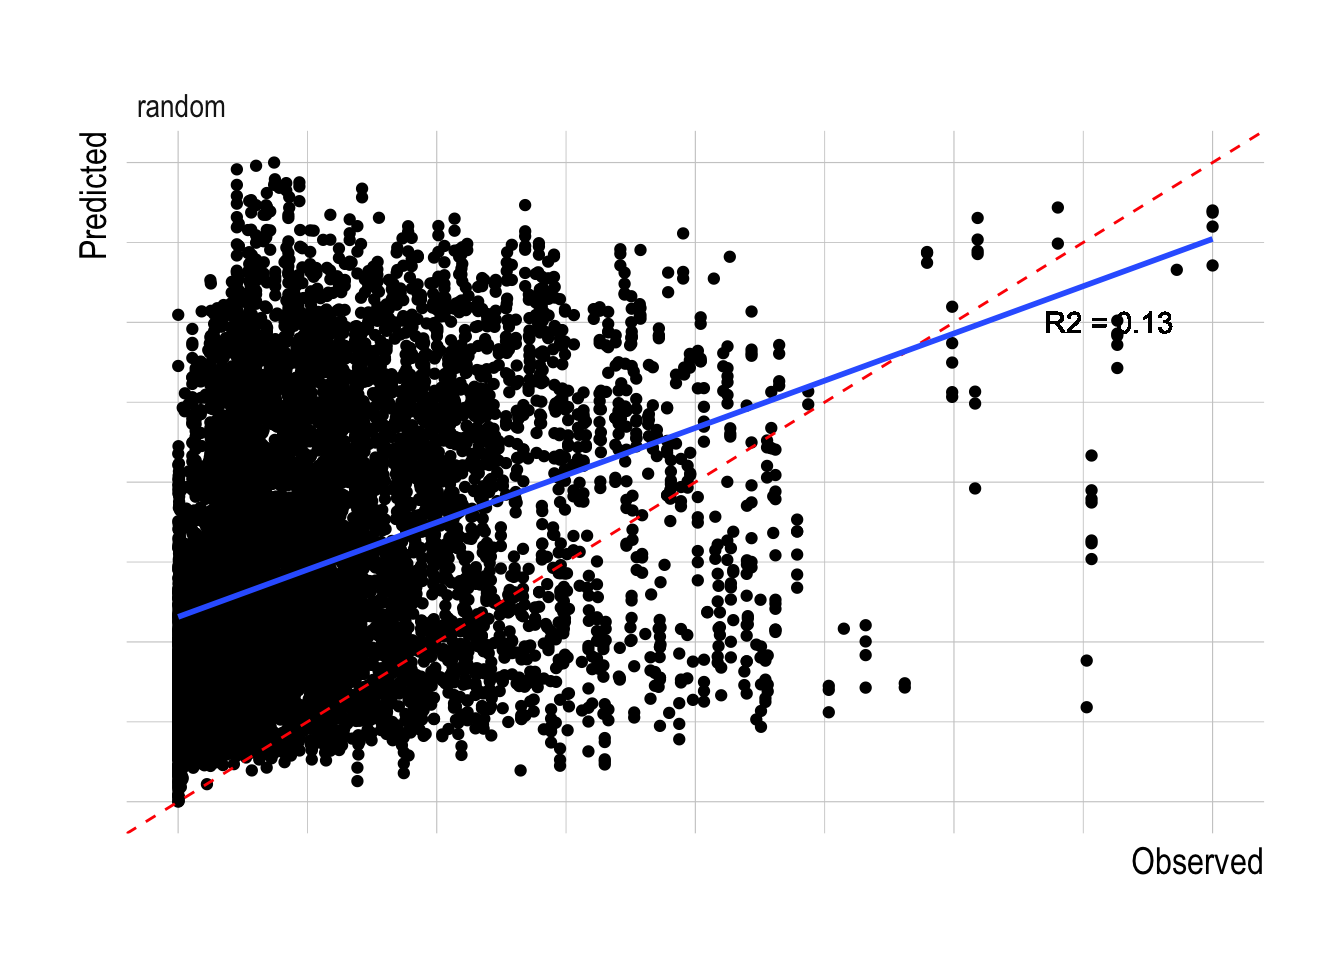 Observed vs predicted biomass (A) and R2 values (B) for the fitted structural model. Red dashed line shows 1:1 relationship, blue line a fitted linear model to the observed and predicted values